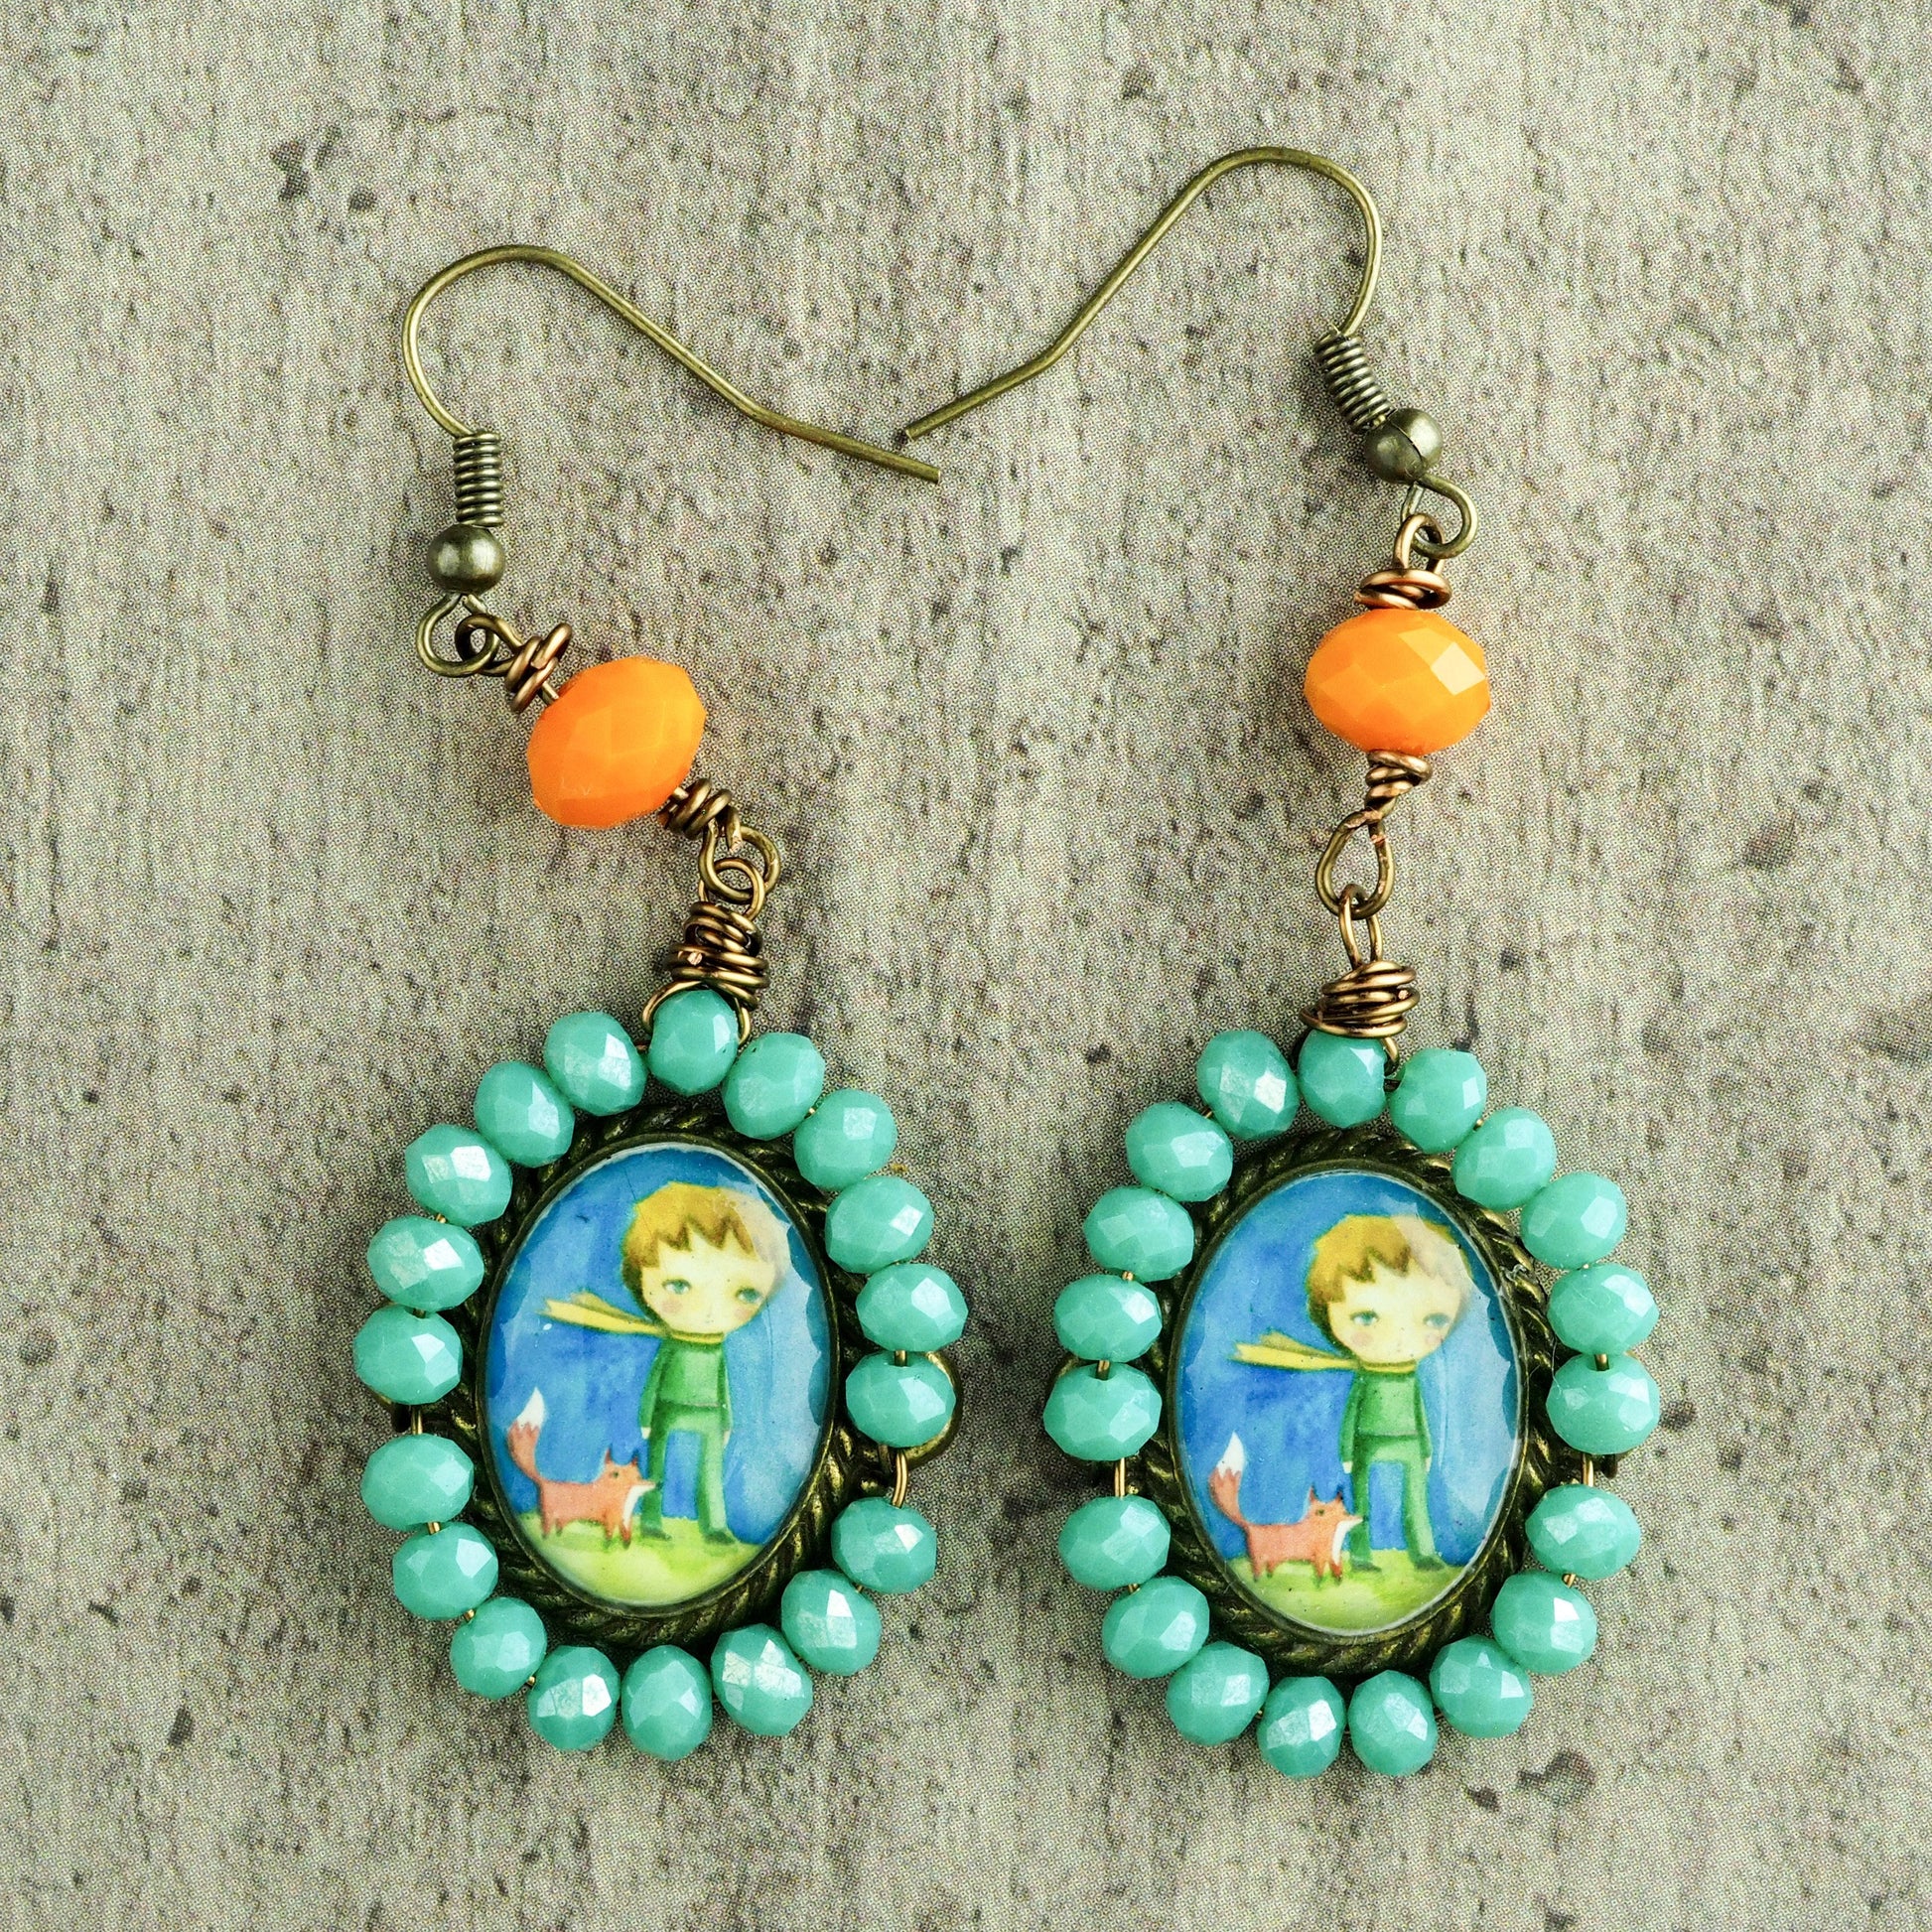 Original one of a kind earrings by Danita. The little prince is painted in the whimsical and surrreal style of Danita. One of a kind original accessories and wearable art.